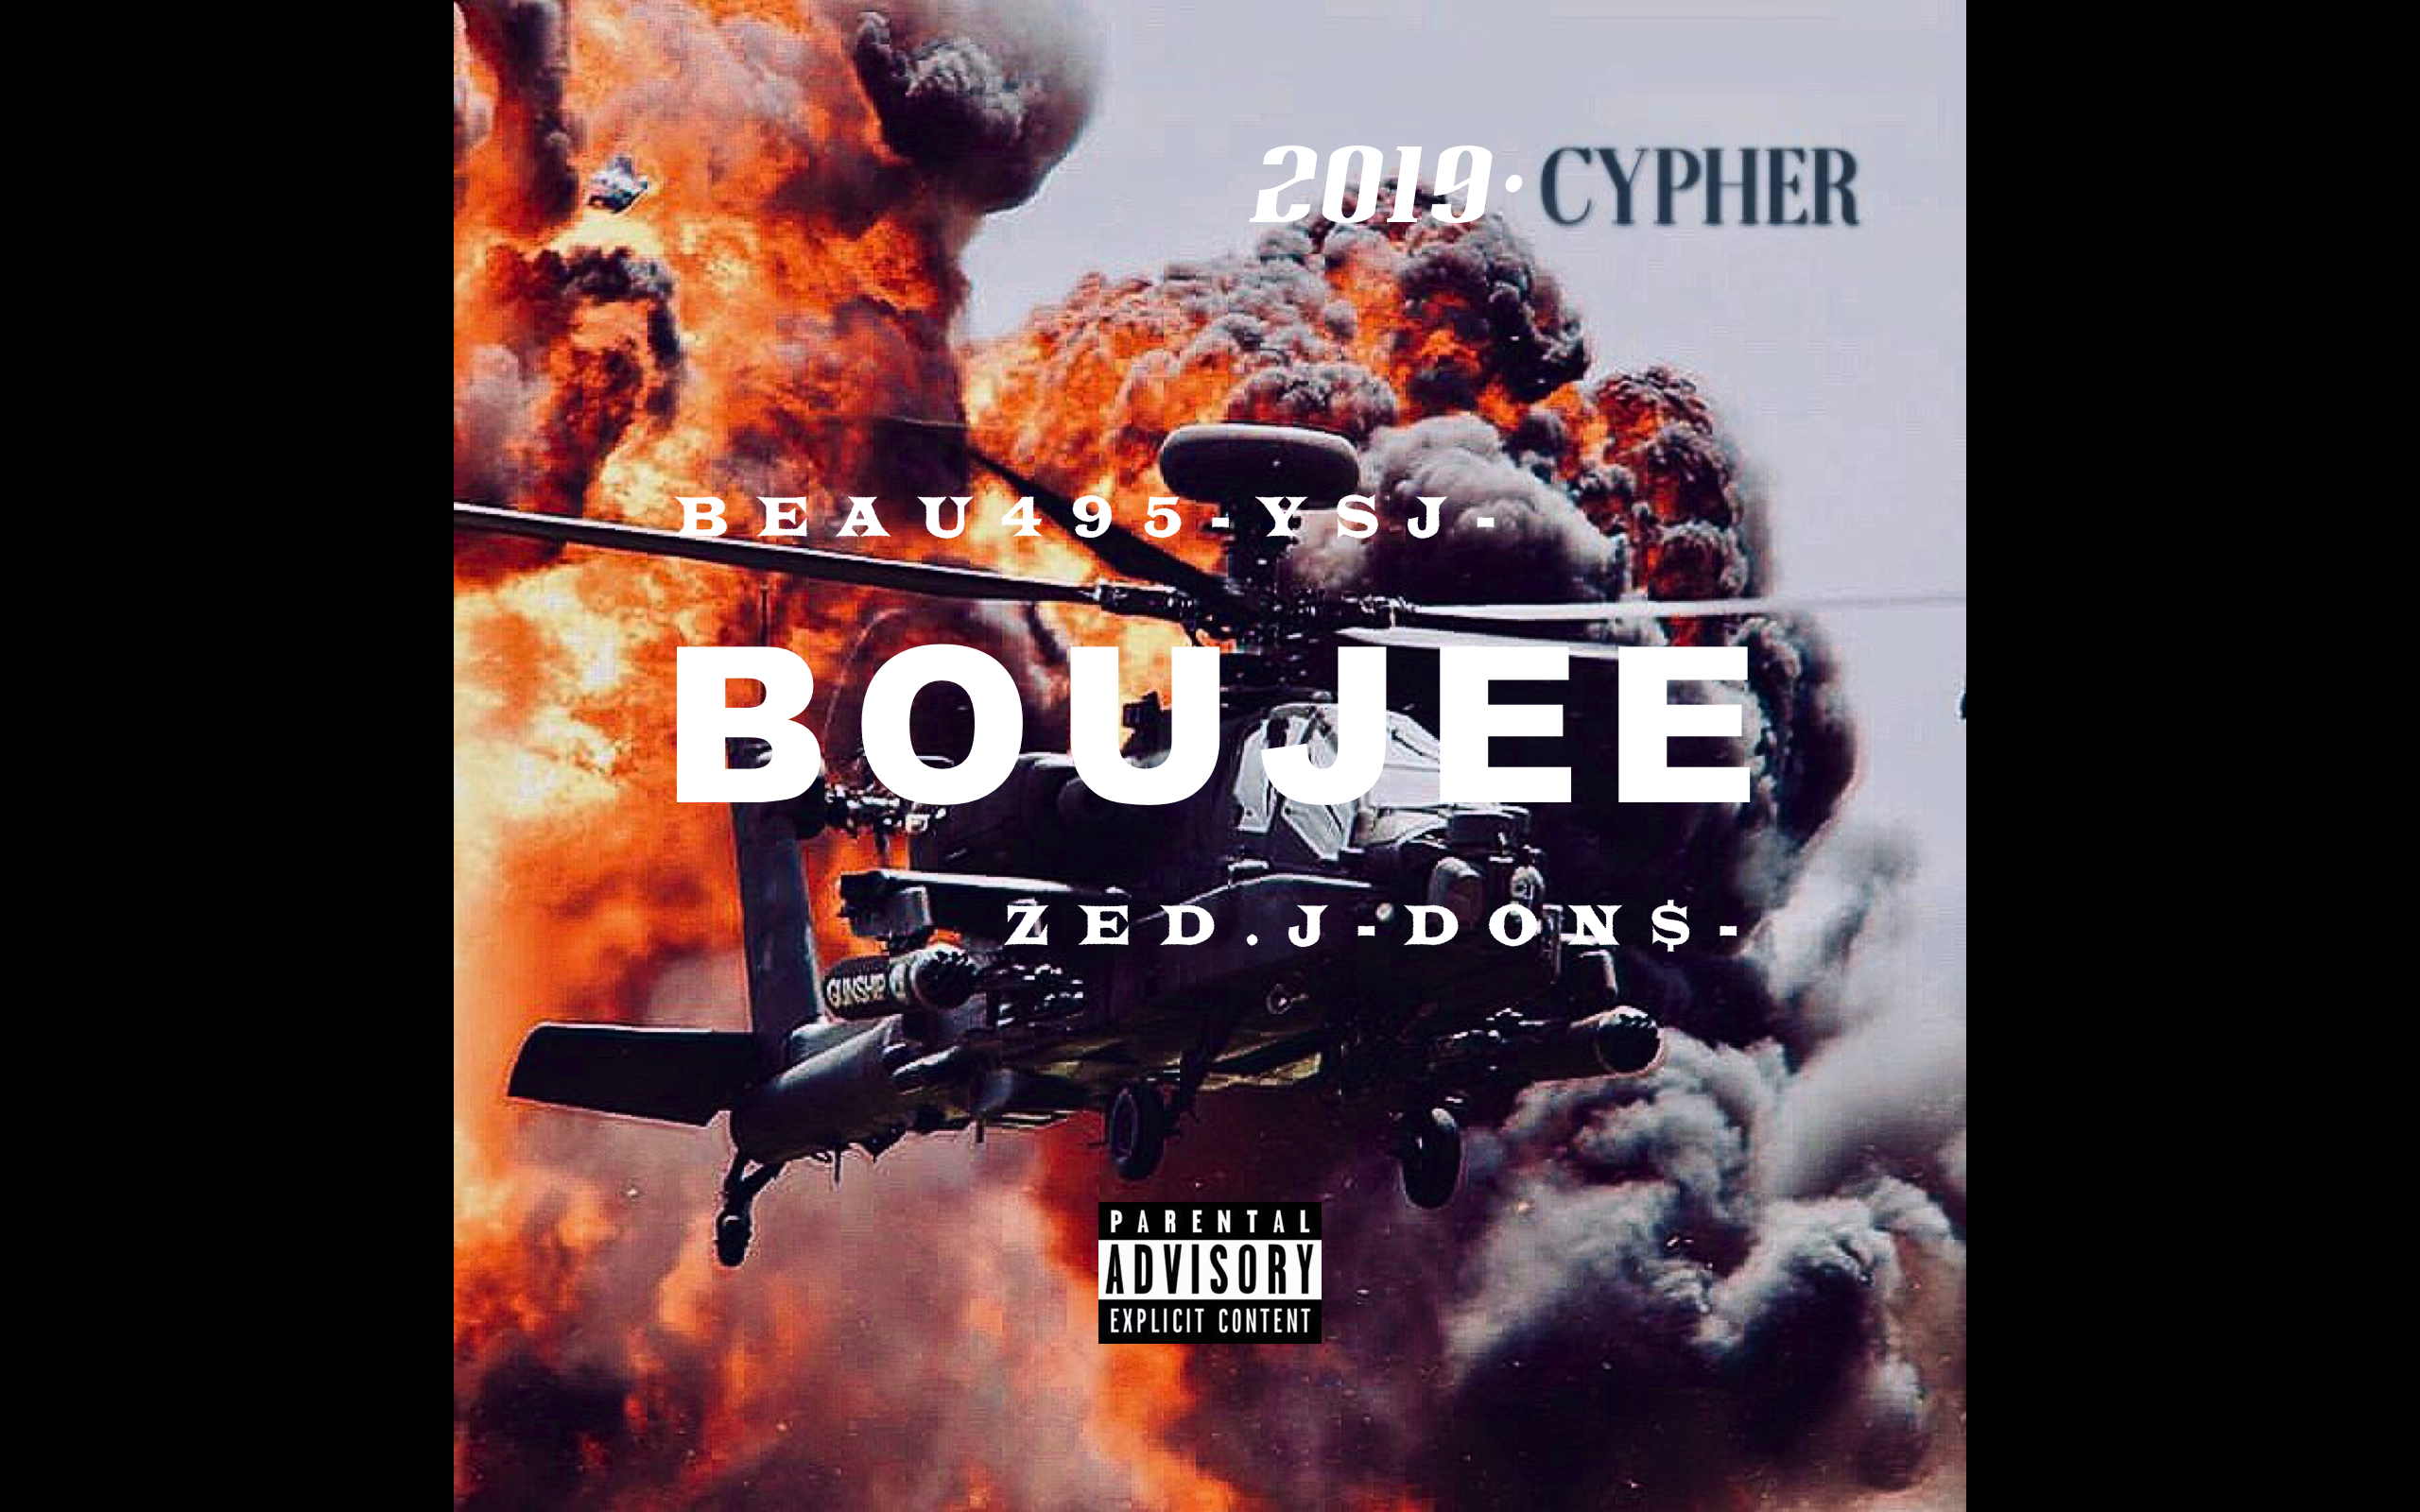 BOUJEE 2019 CYPHER